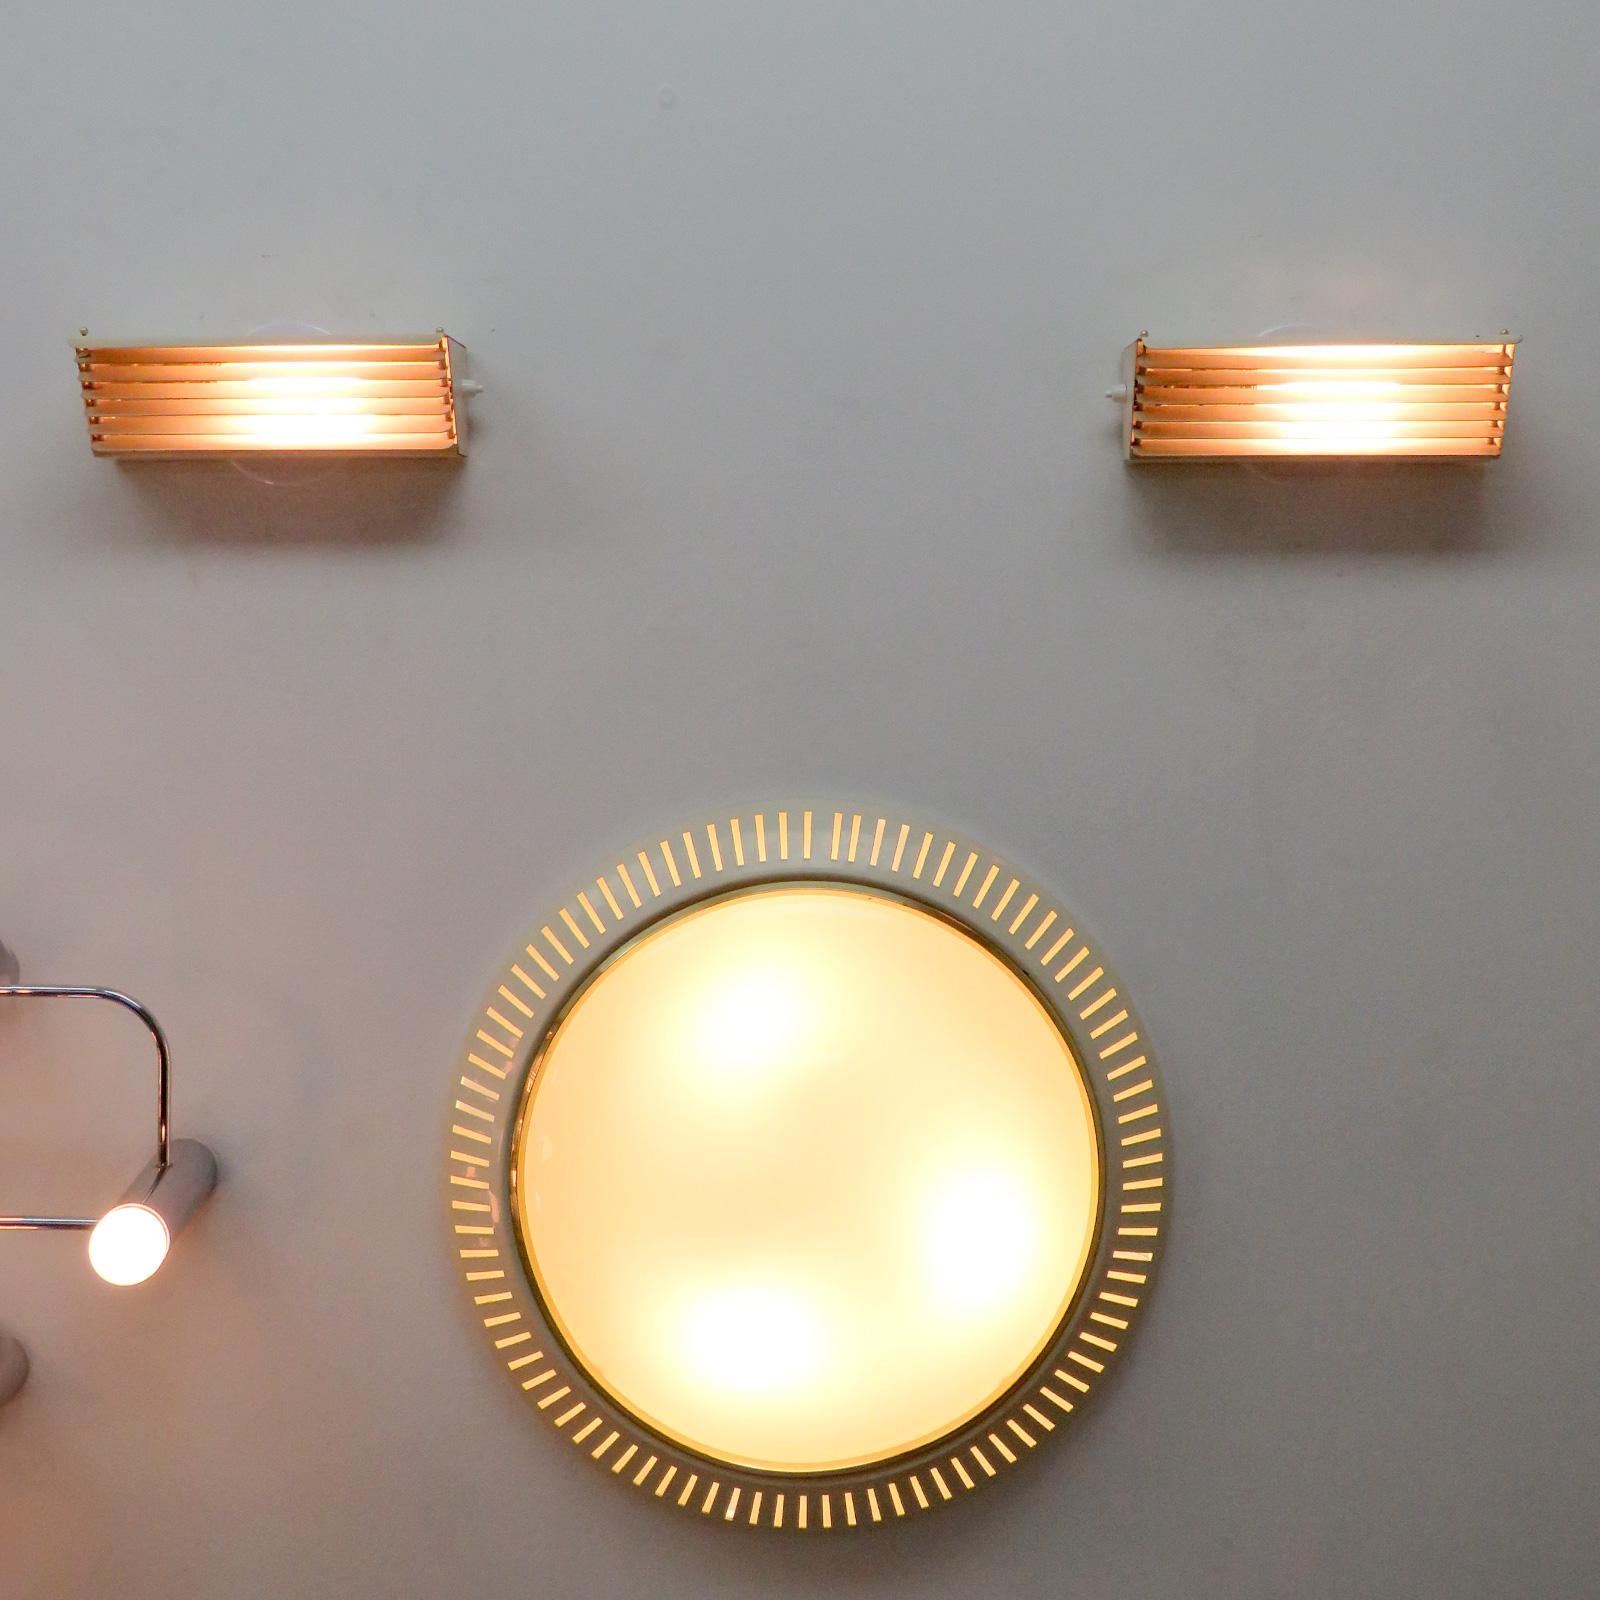 Jacques Biny for Luminalite Edition Model '212' Wall Lights 1